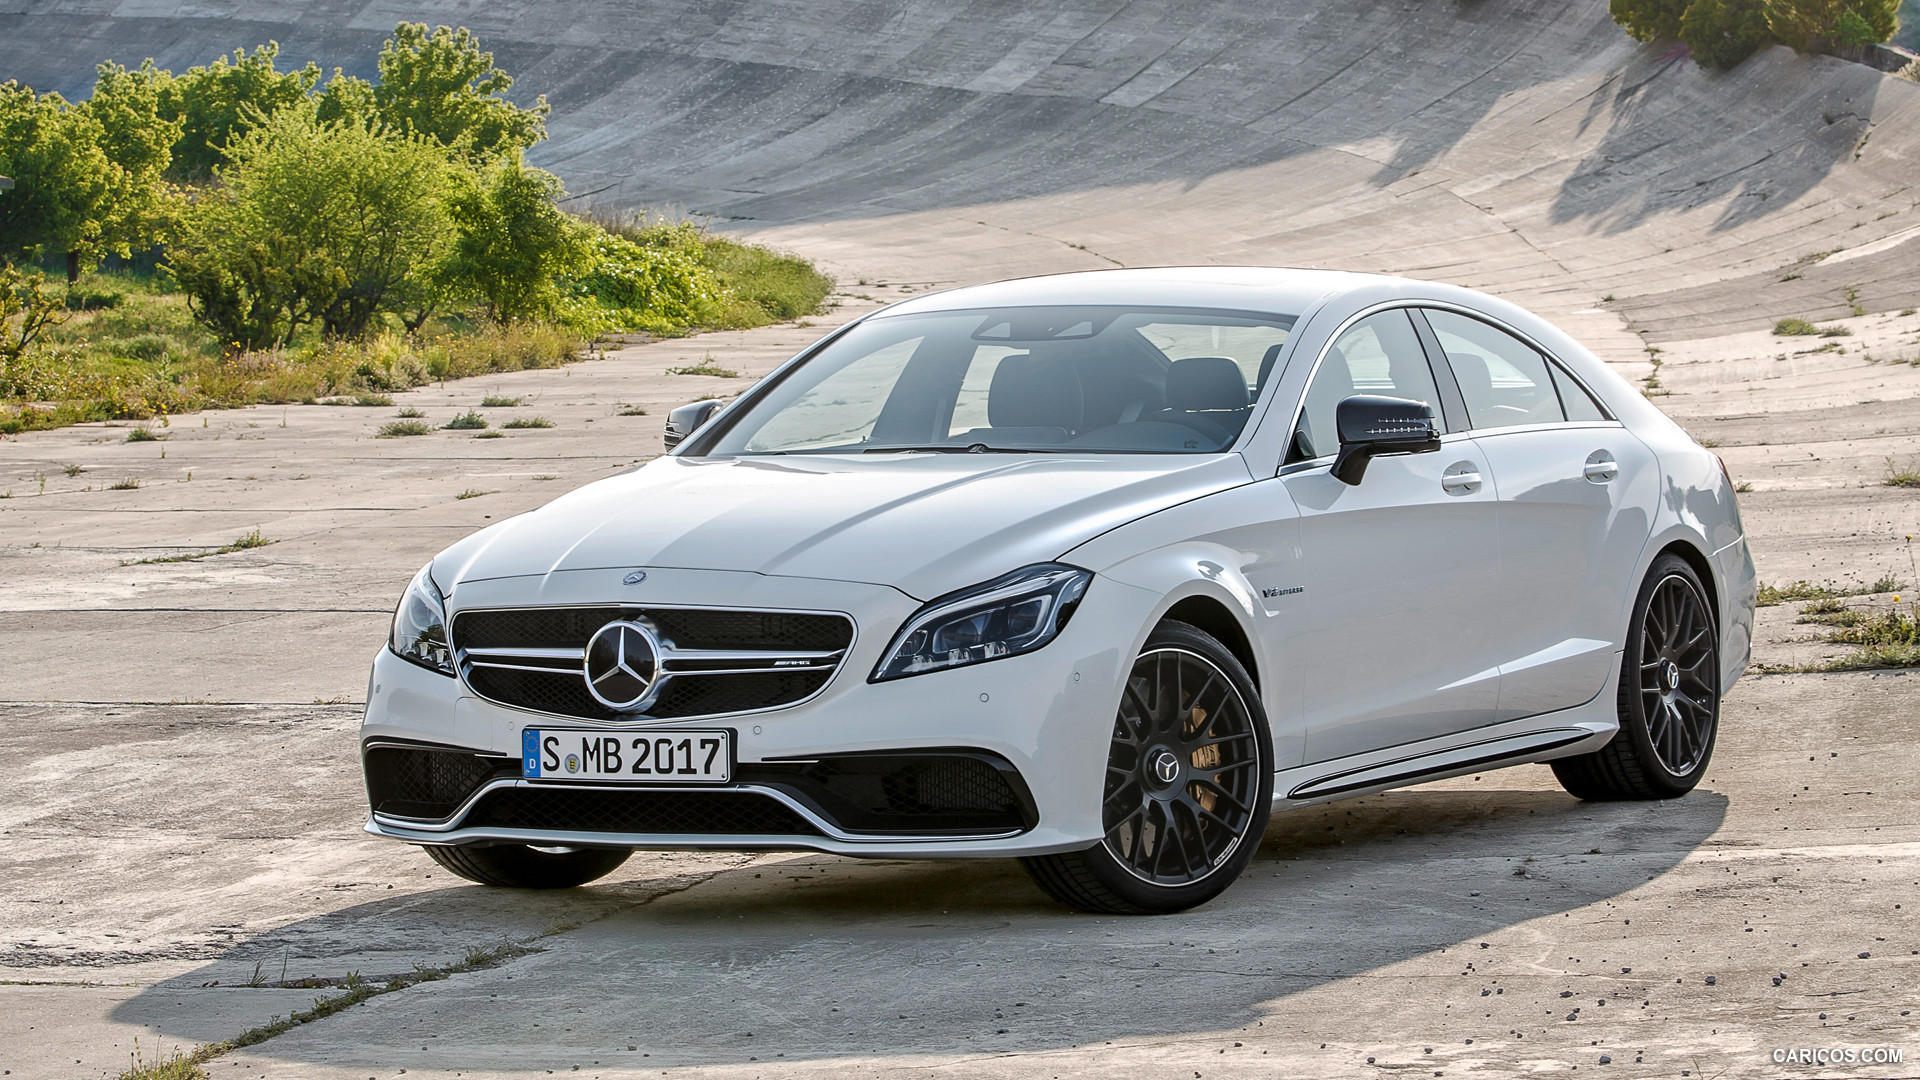 2015 Mercedes-Benz CLS 63 AMG S-Model - Front, #17 of 51